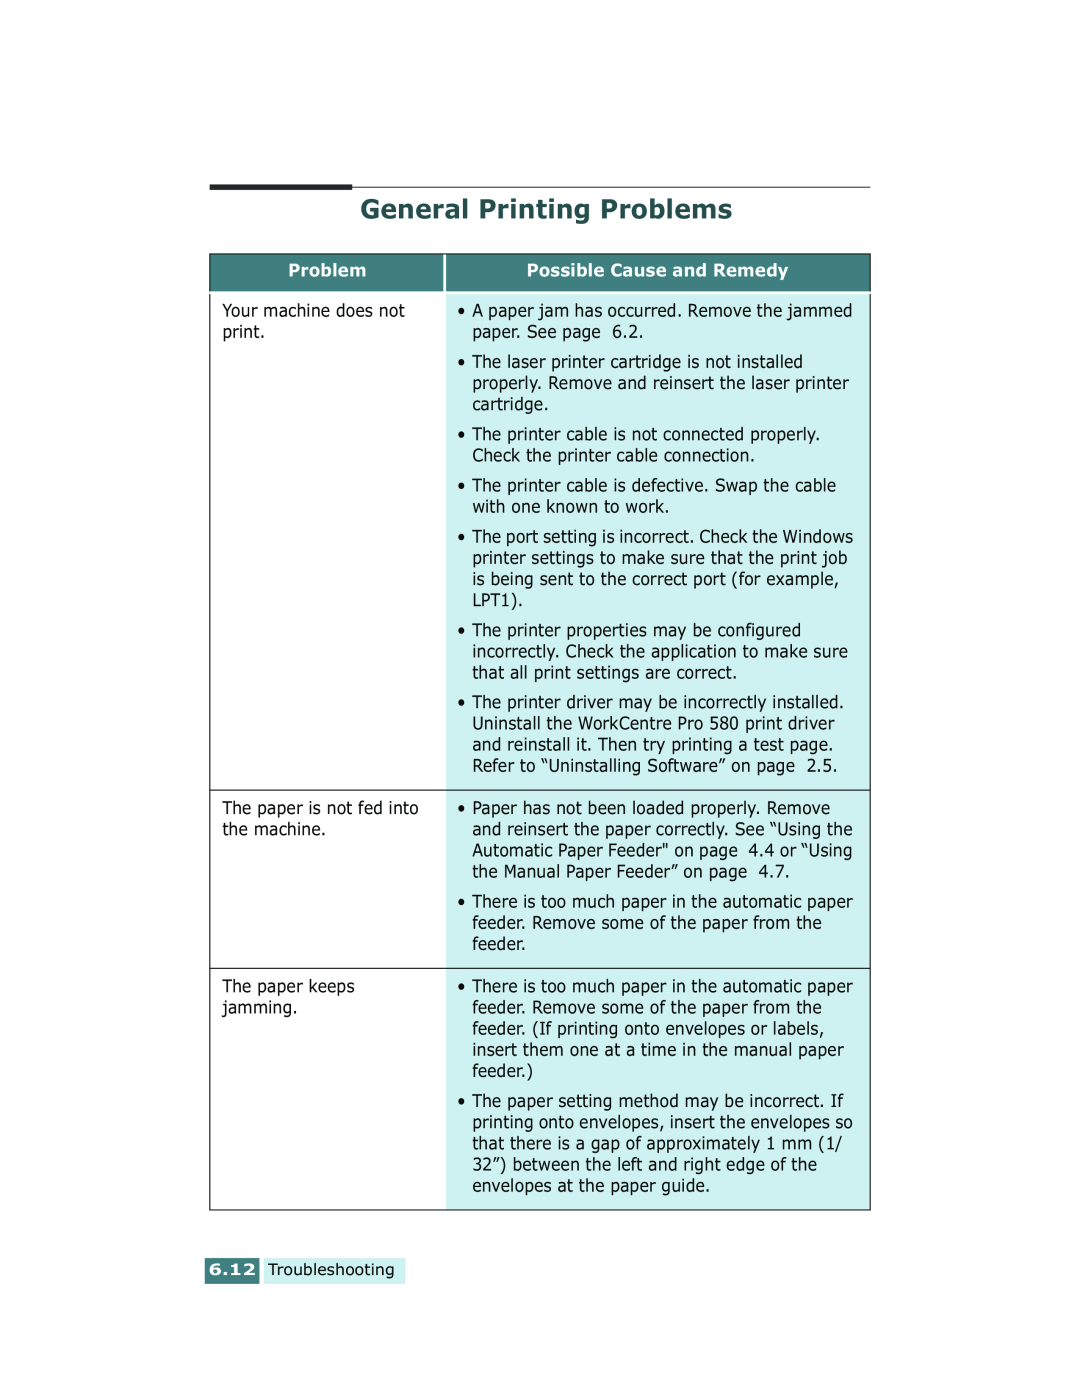 Xerox Pro 580 manual General Printing Problems, Possible Cause and Remedy 